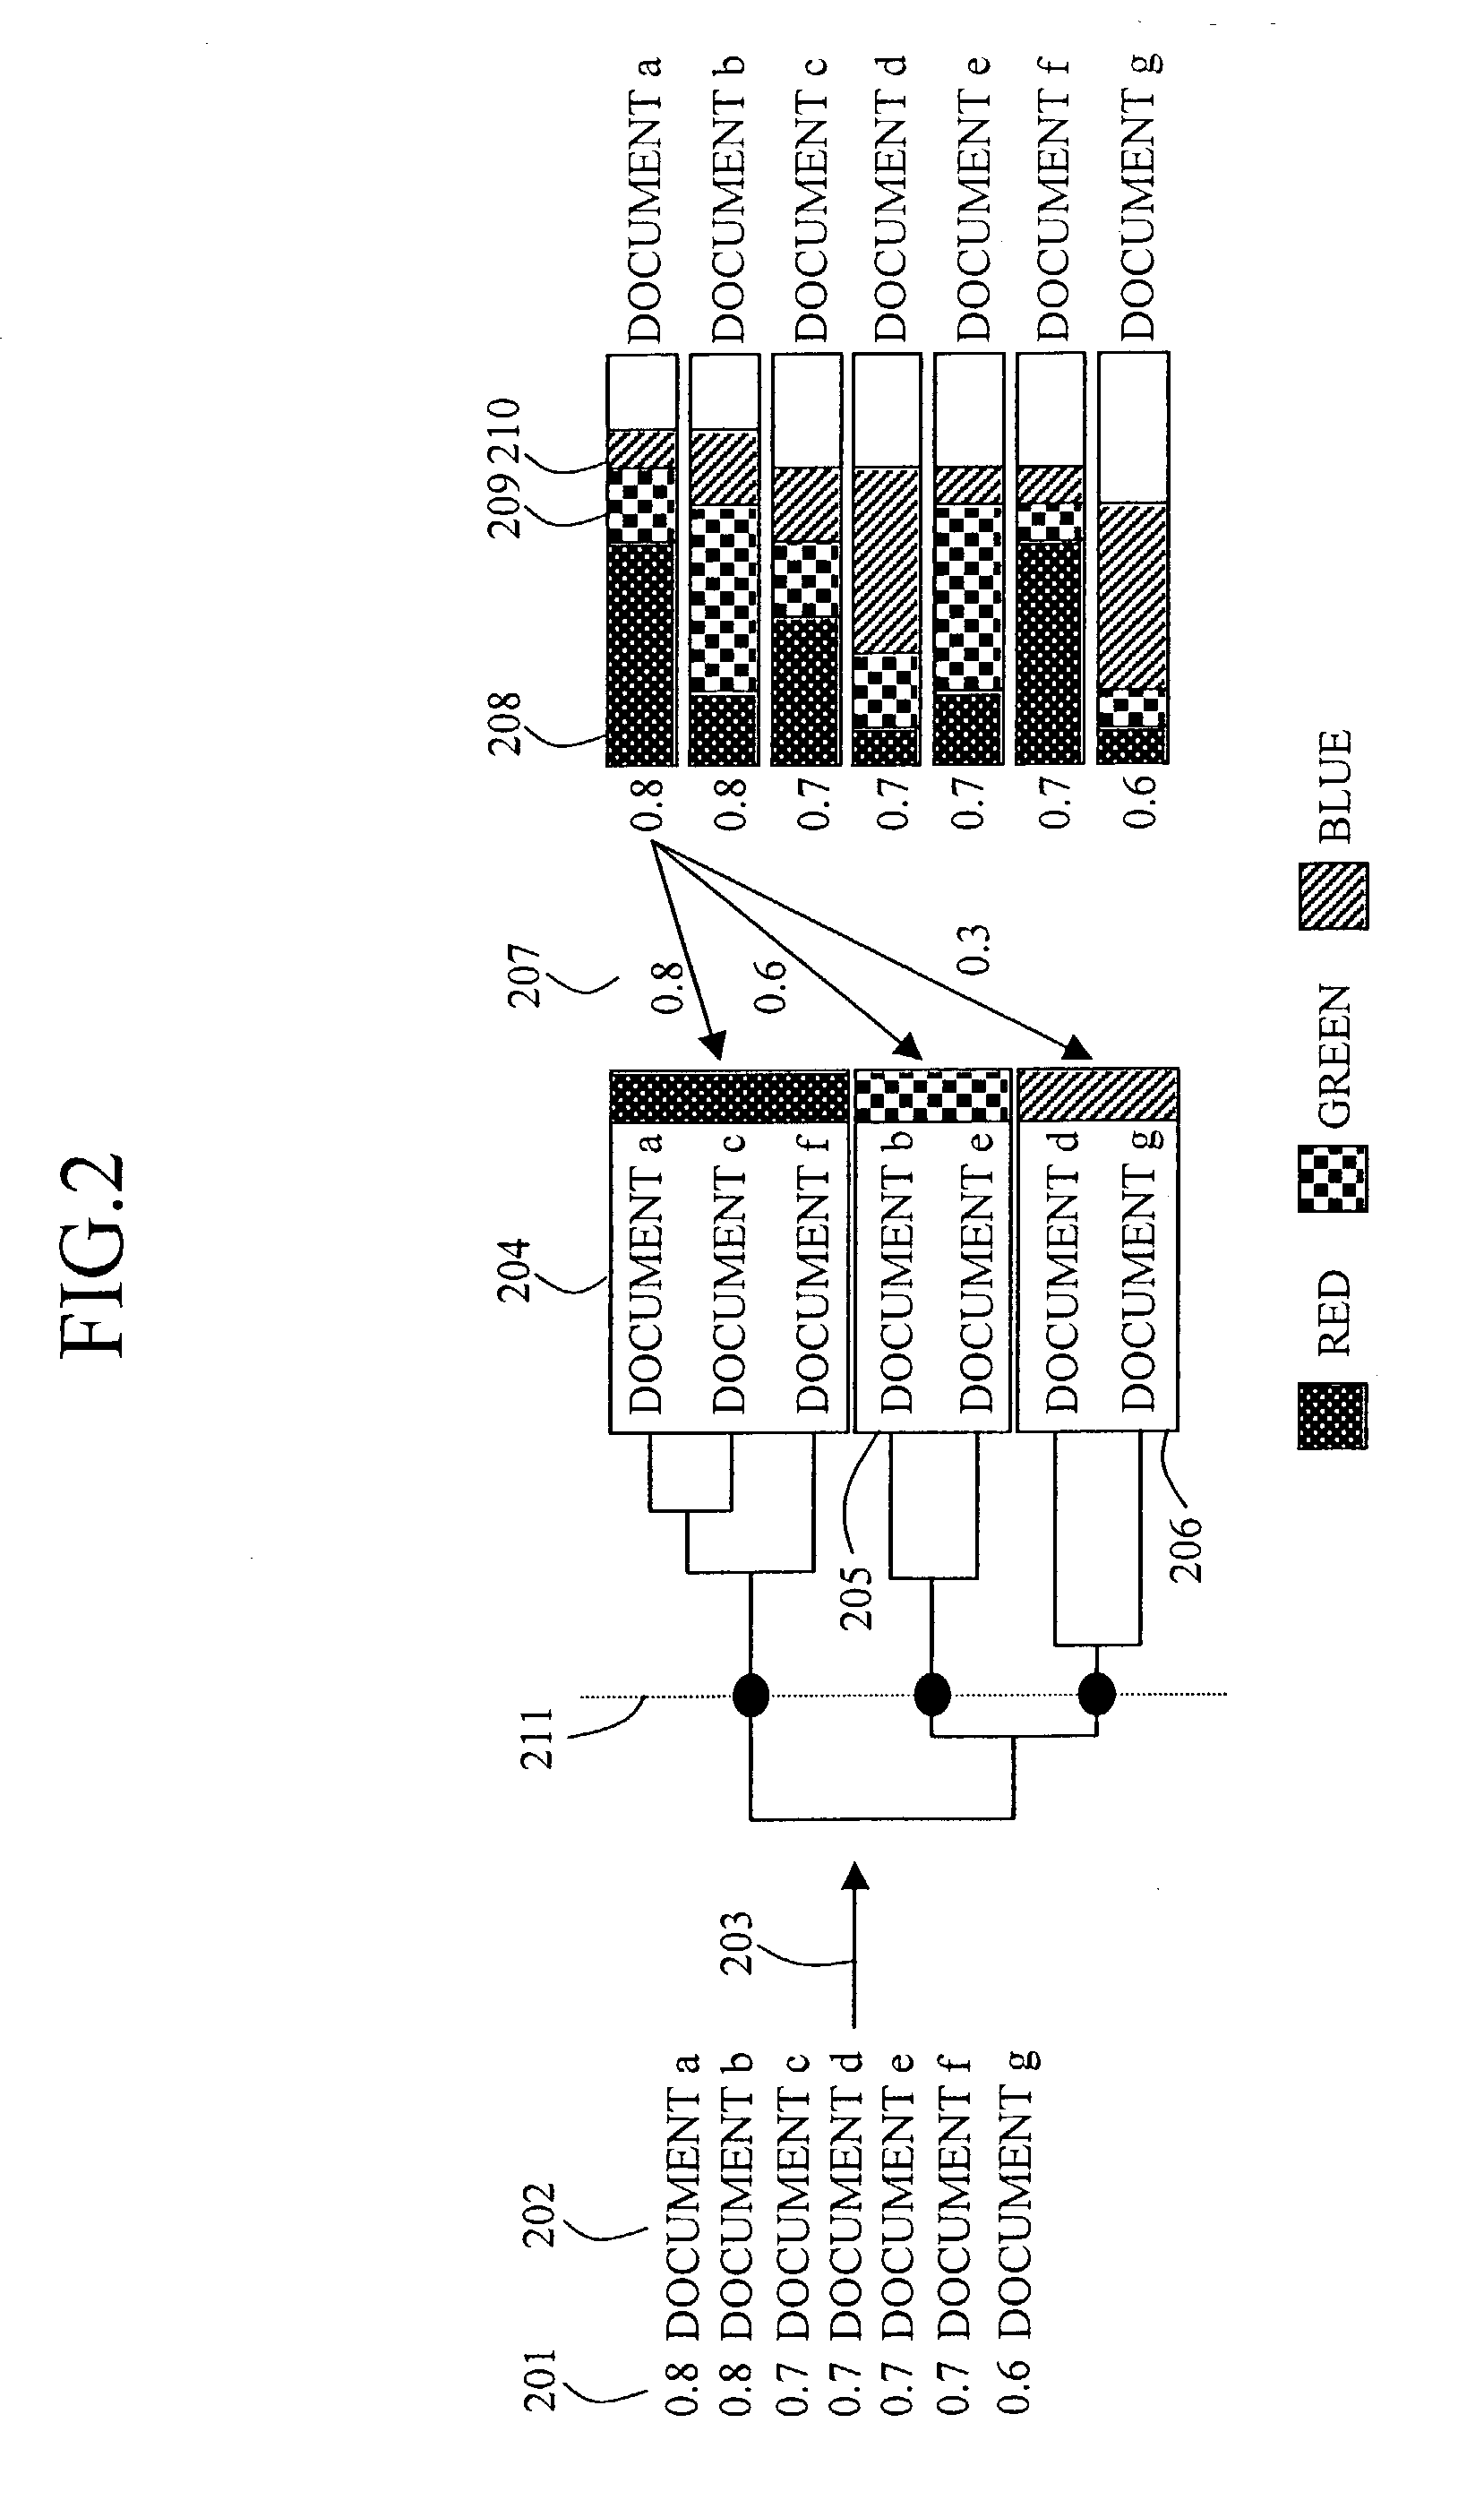 Document search method and system, and document search result display system